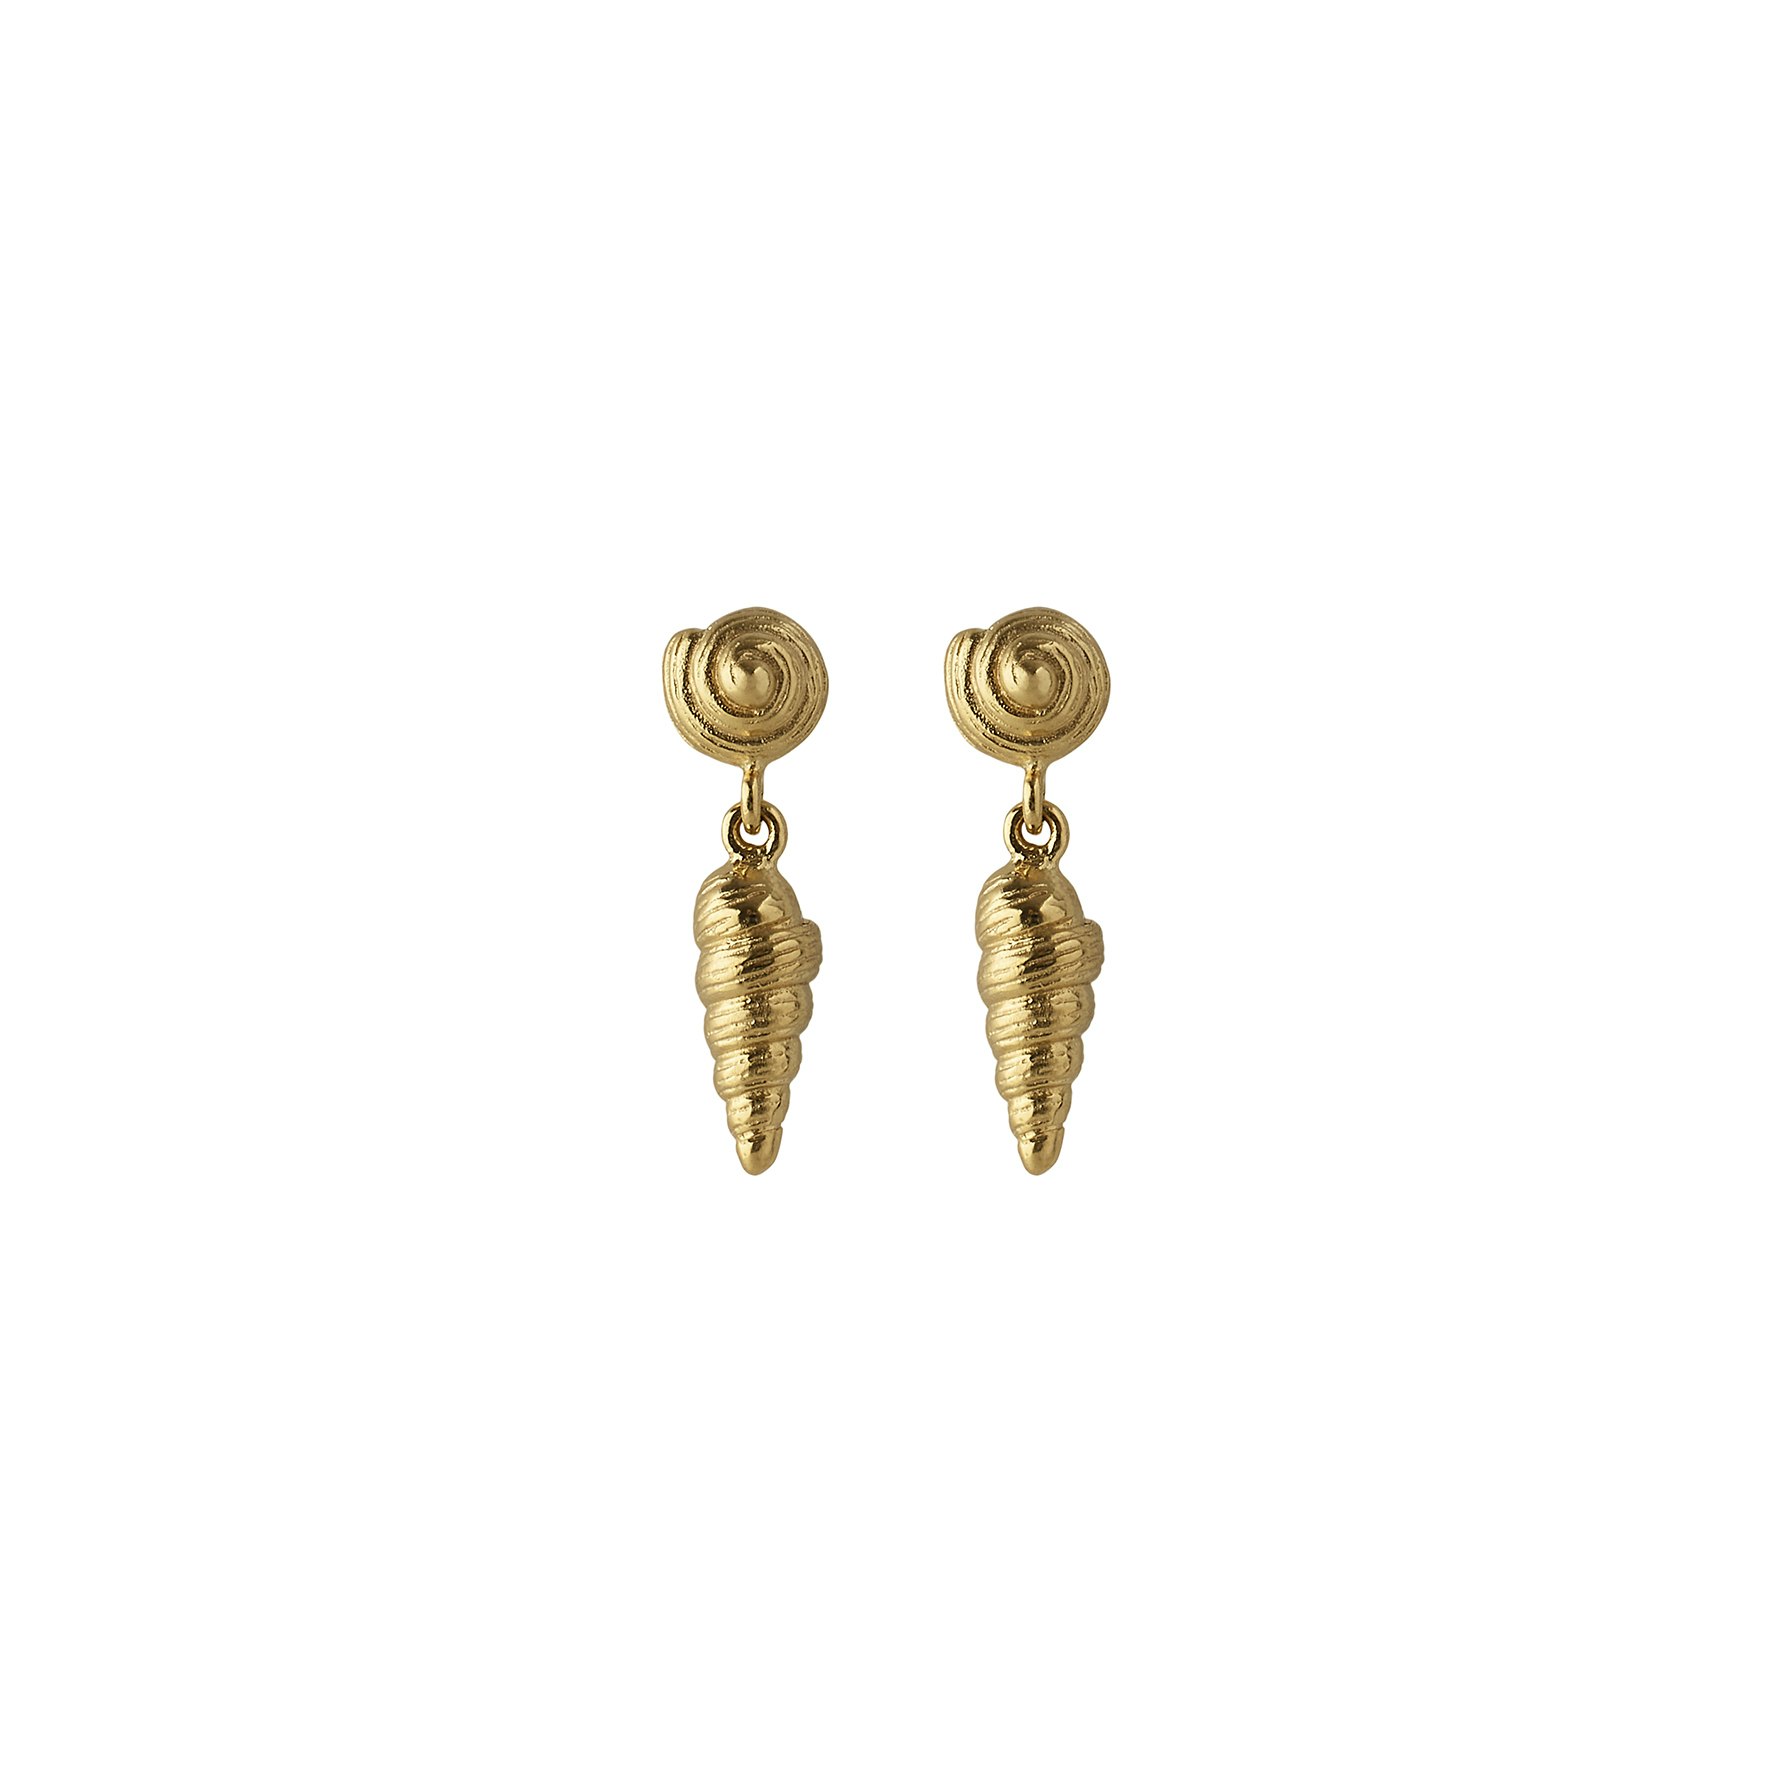 Cocoon Earrings from Pernille Corydon in Goldplated Silver Sterling 925